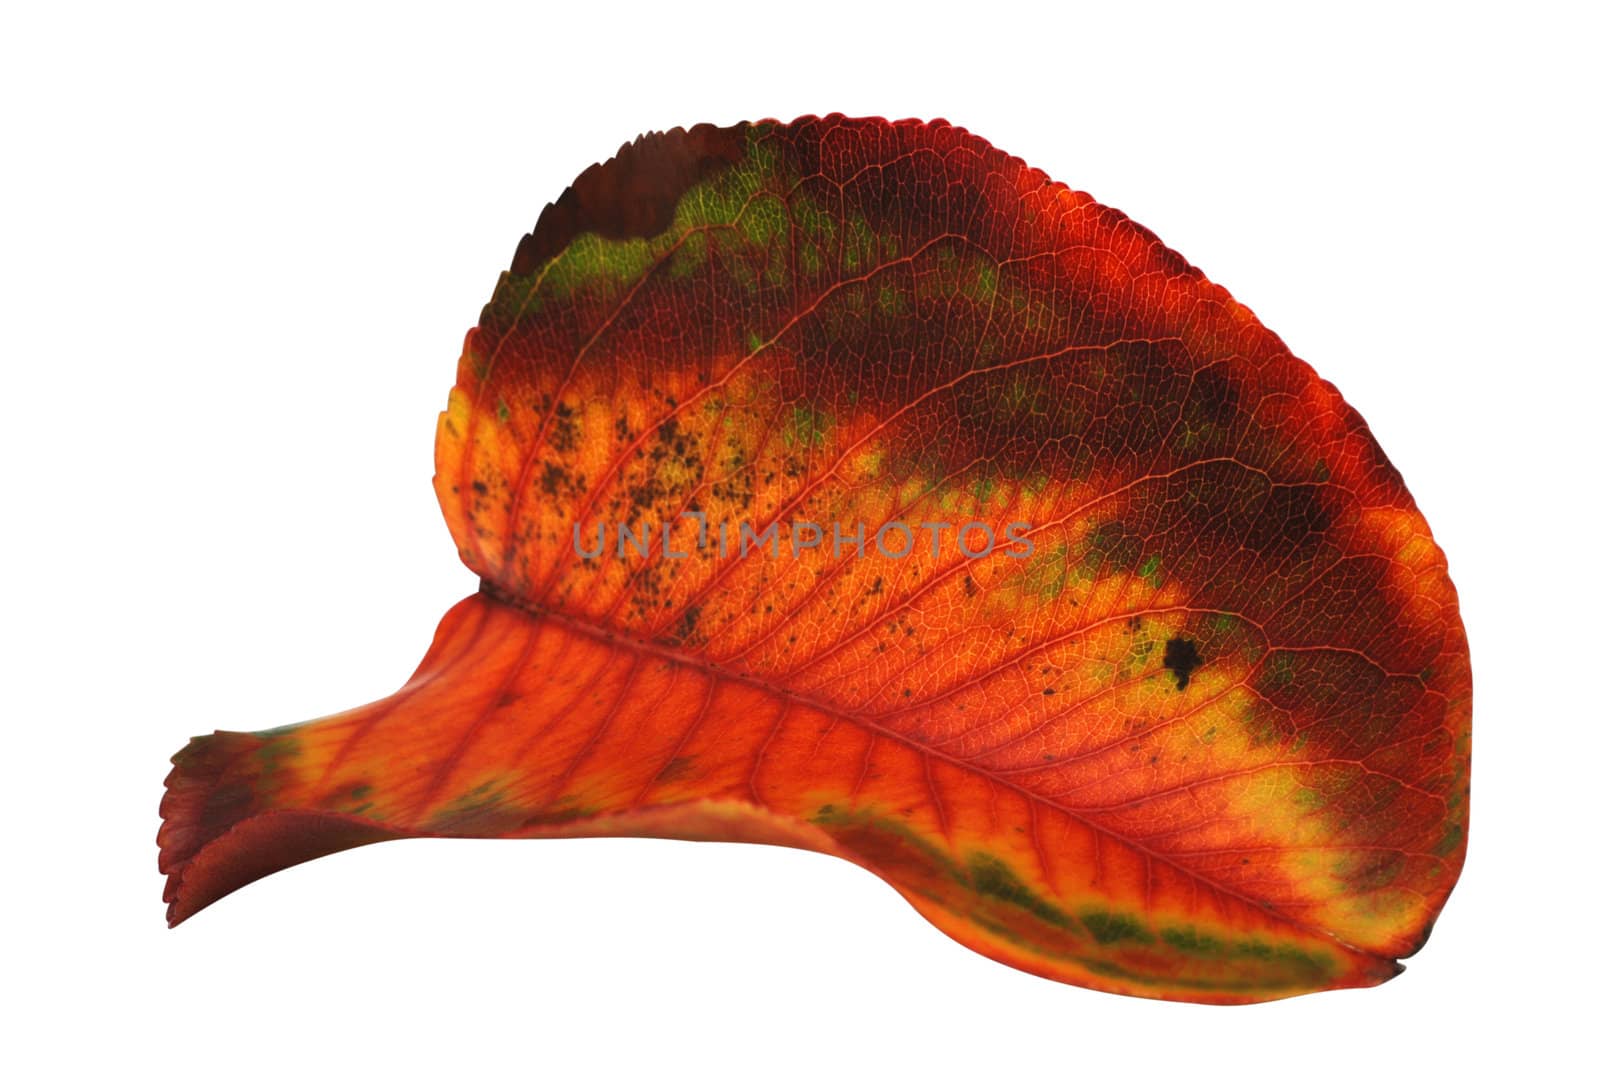 Single autumn leaf isolated on white background with clipping path.